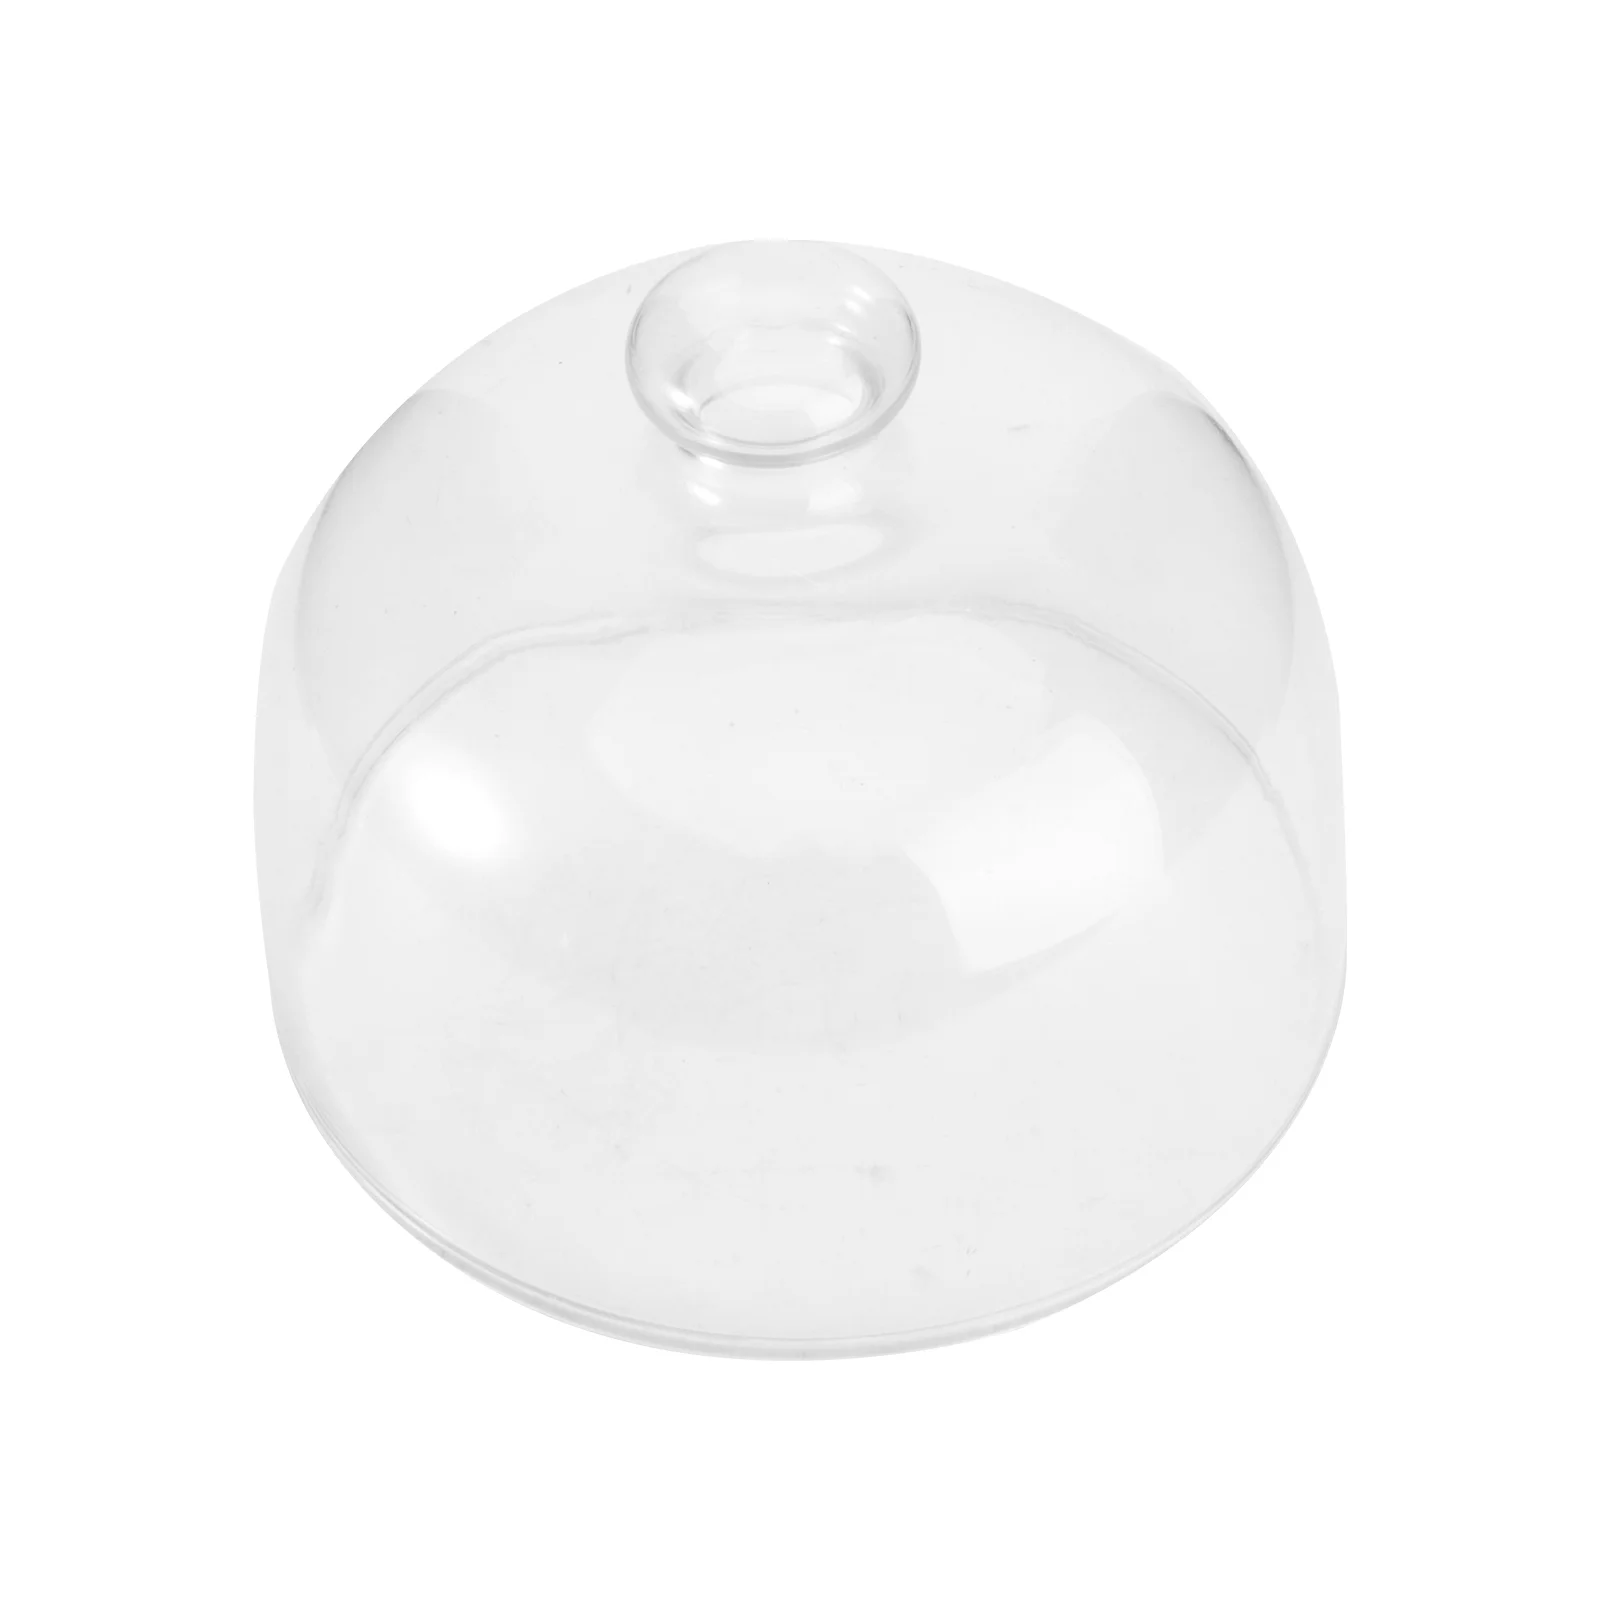 

Cover Cake Dome Stand Cupcake Glasscloche Dessertdisplay Round Storage Decorative Tray Clear Covers Protector Microwave Tabletop